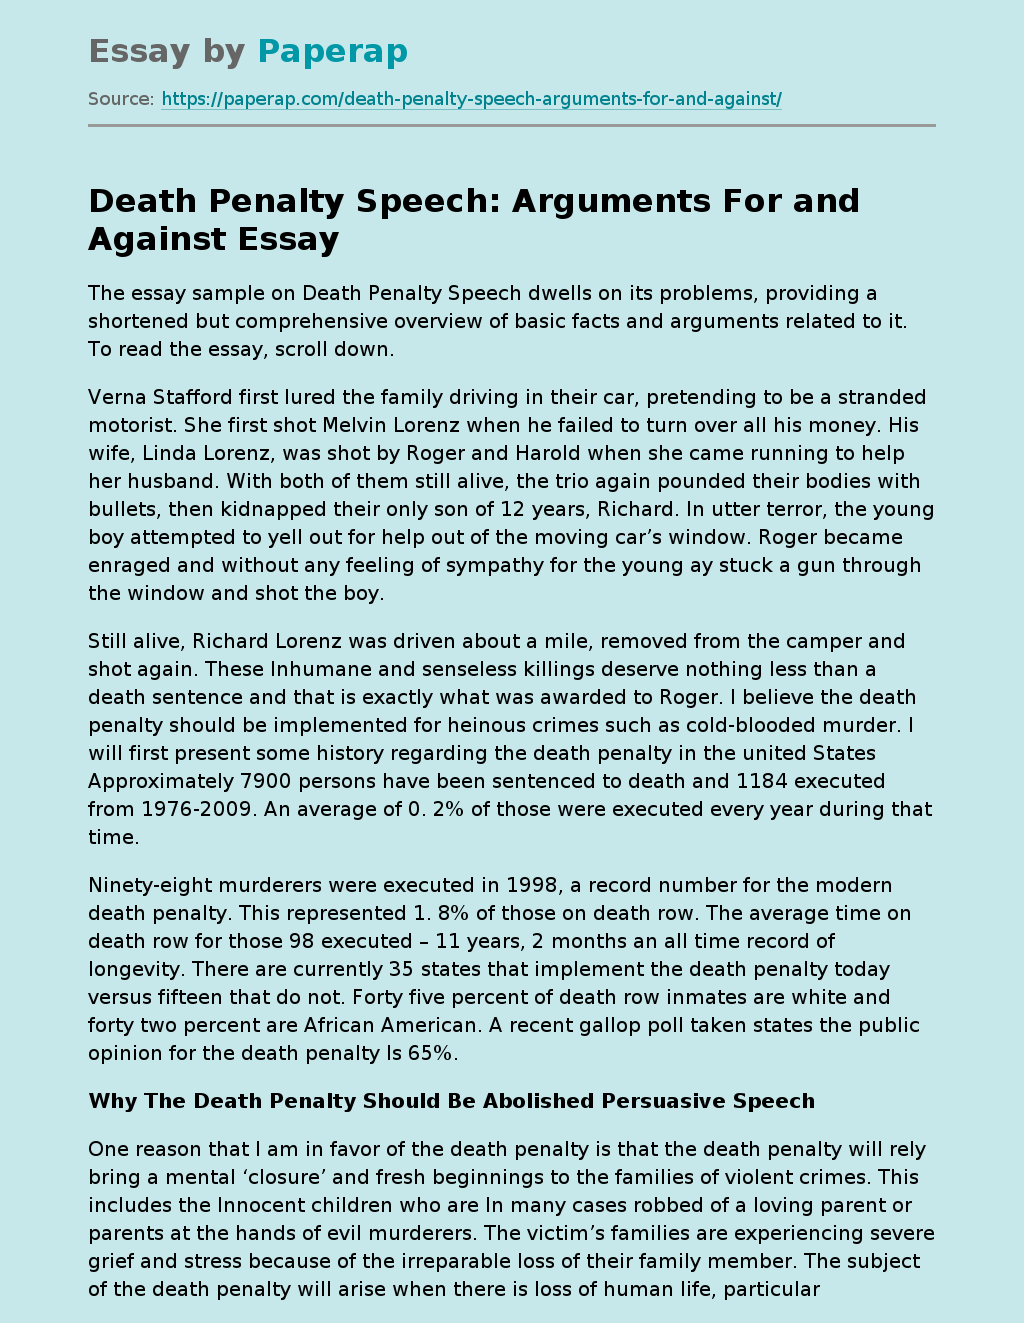 Death Penalty Speech: Arguments For and Against